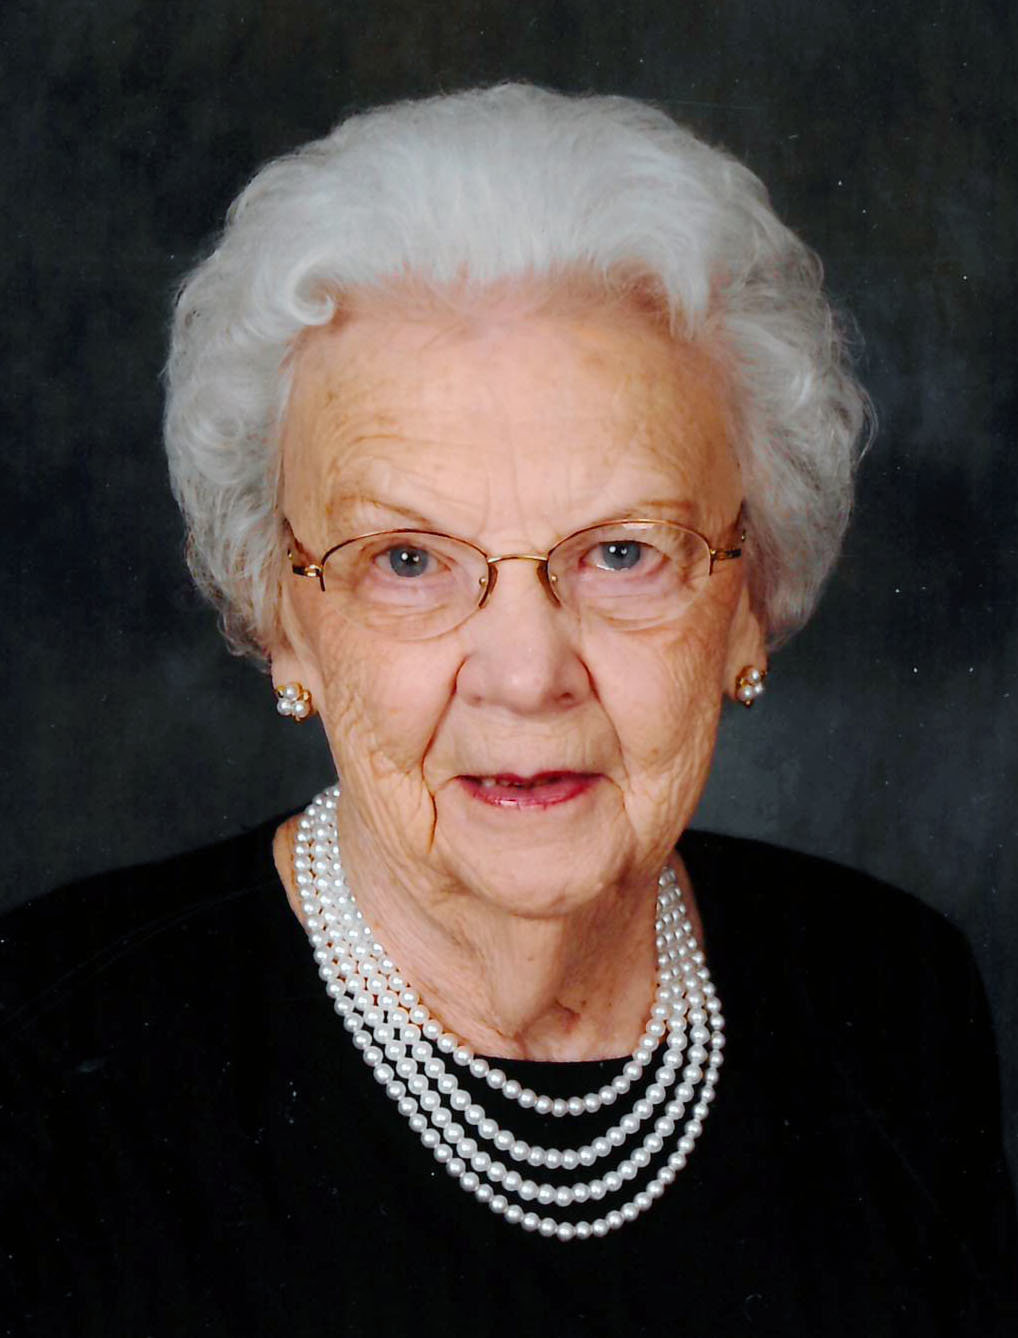 Dolores V. Freitag, 104, of West Point, Iowa, passed away at 4:45 p.m. Friday, August 12, 2022, at the West Point Care Center.